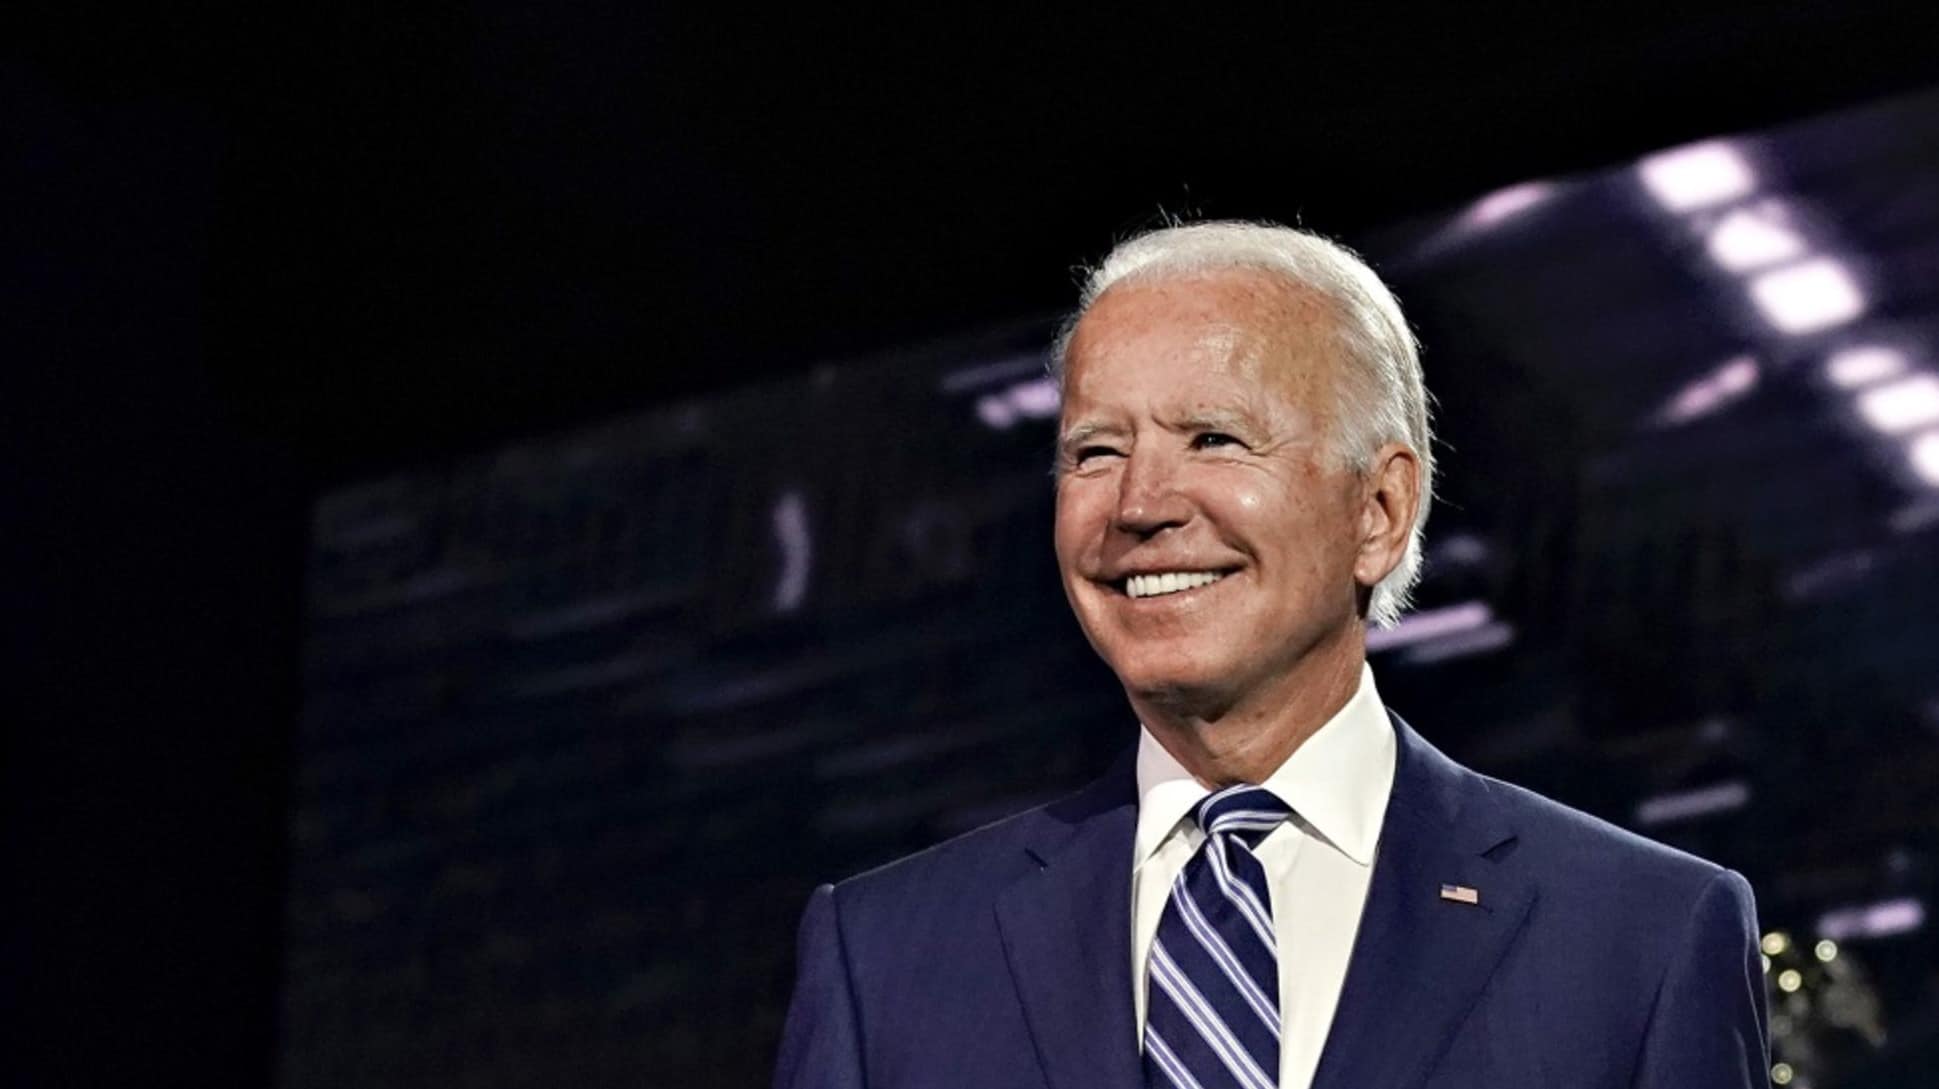 'Do I Look Like a Radical Socialist Who Has a Soft Spot For Rioters?' Biden Replies For On Trump's Attacks